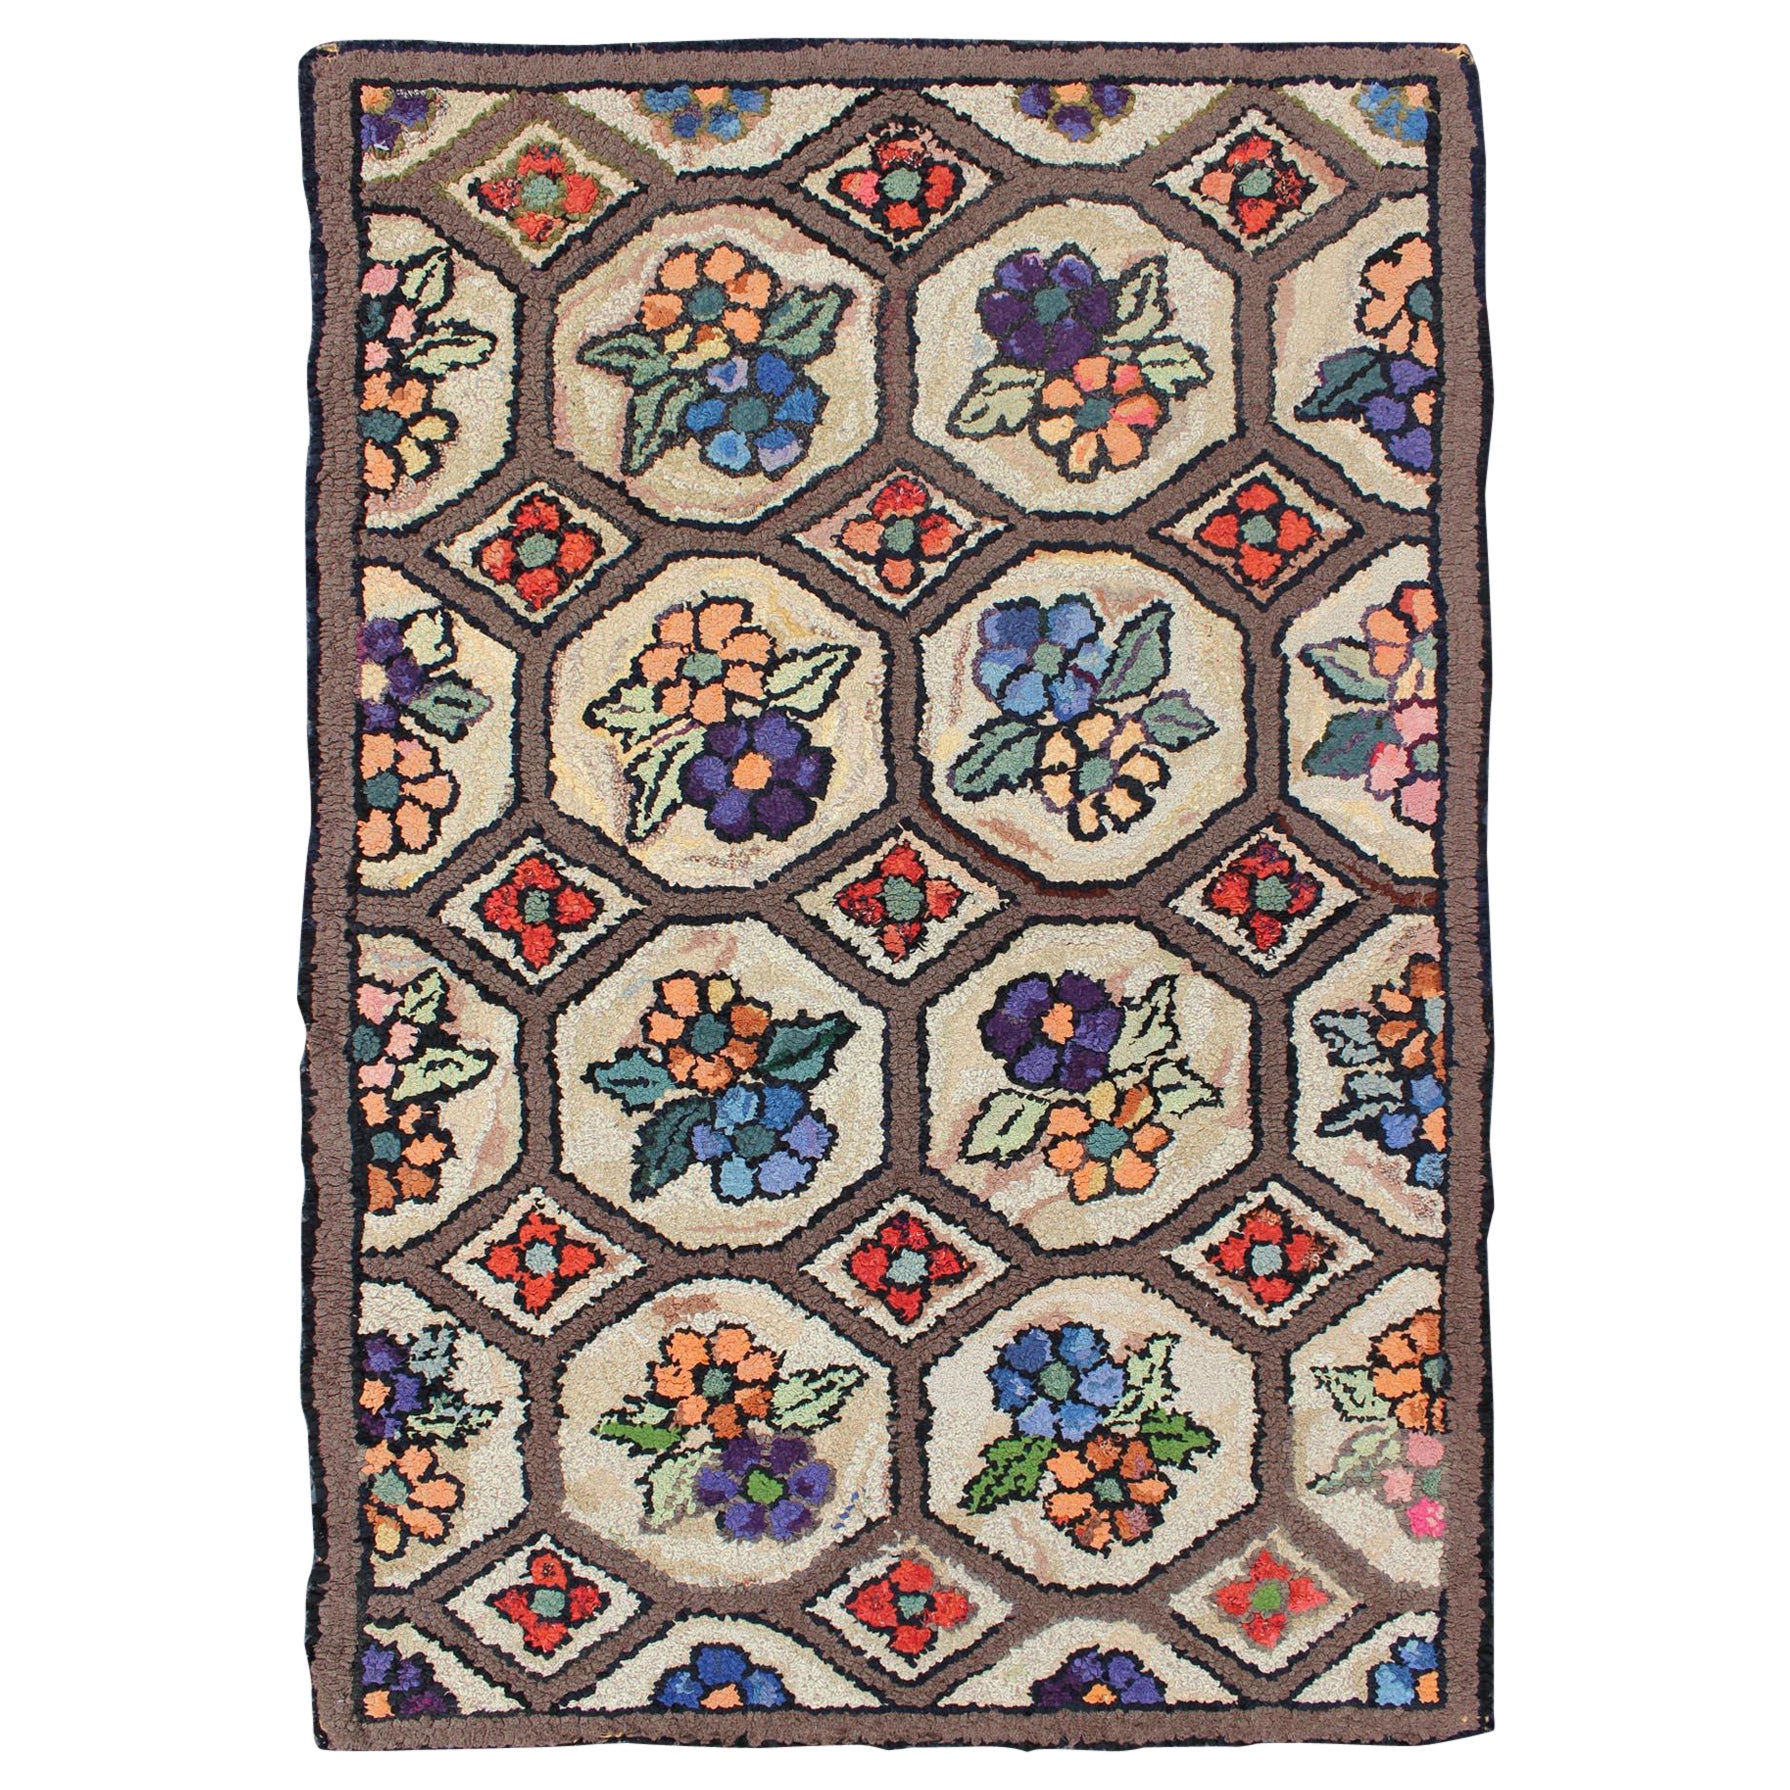 Outstanding Antique American Hooked Rug with All-Over Floral Design